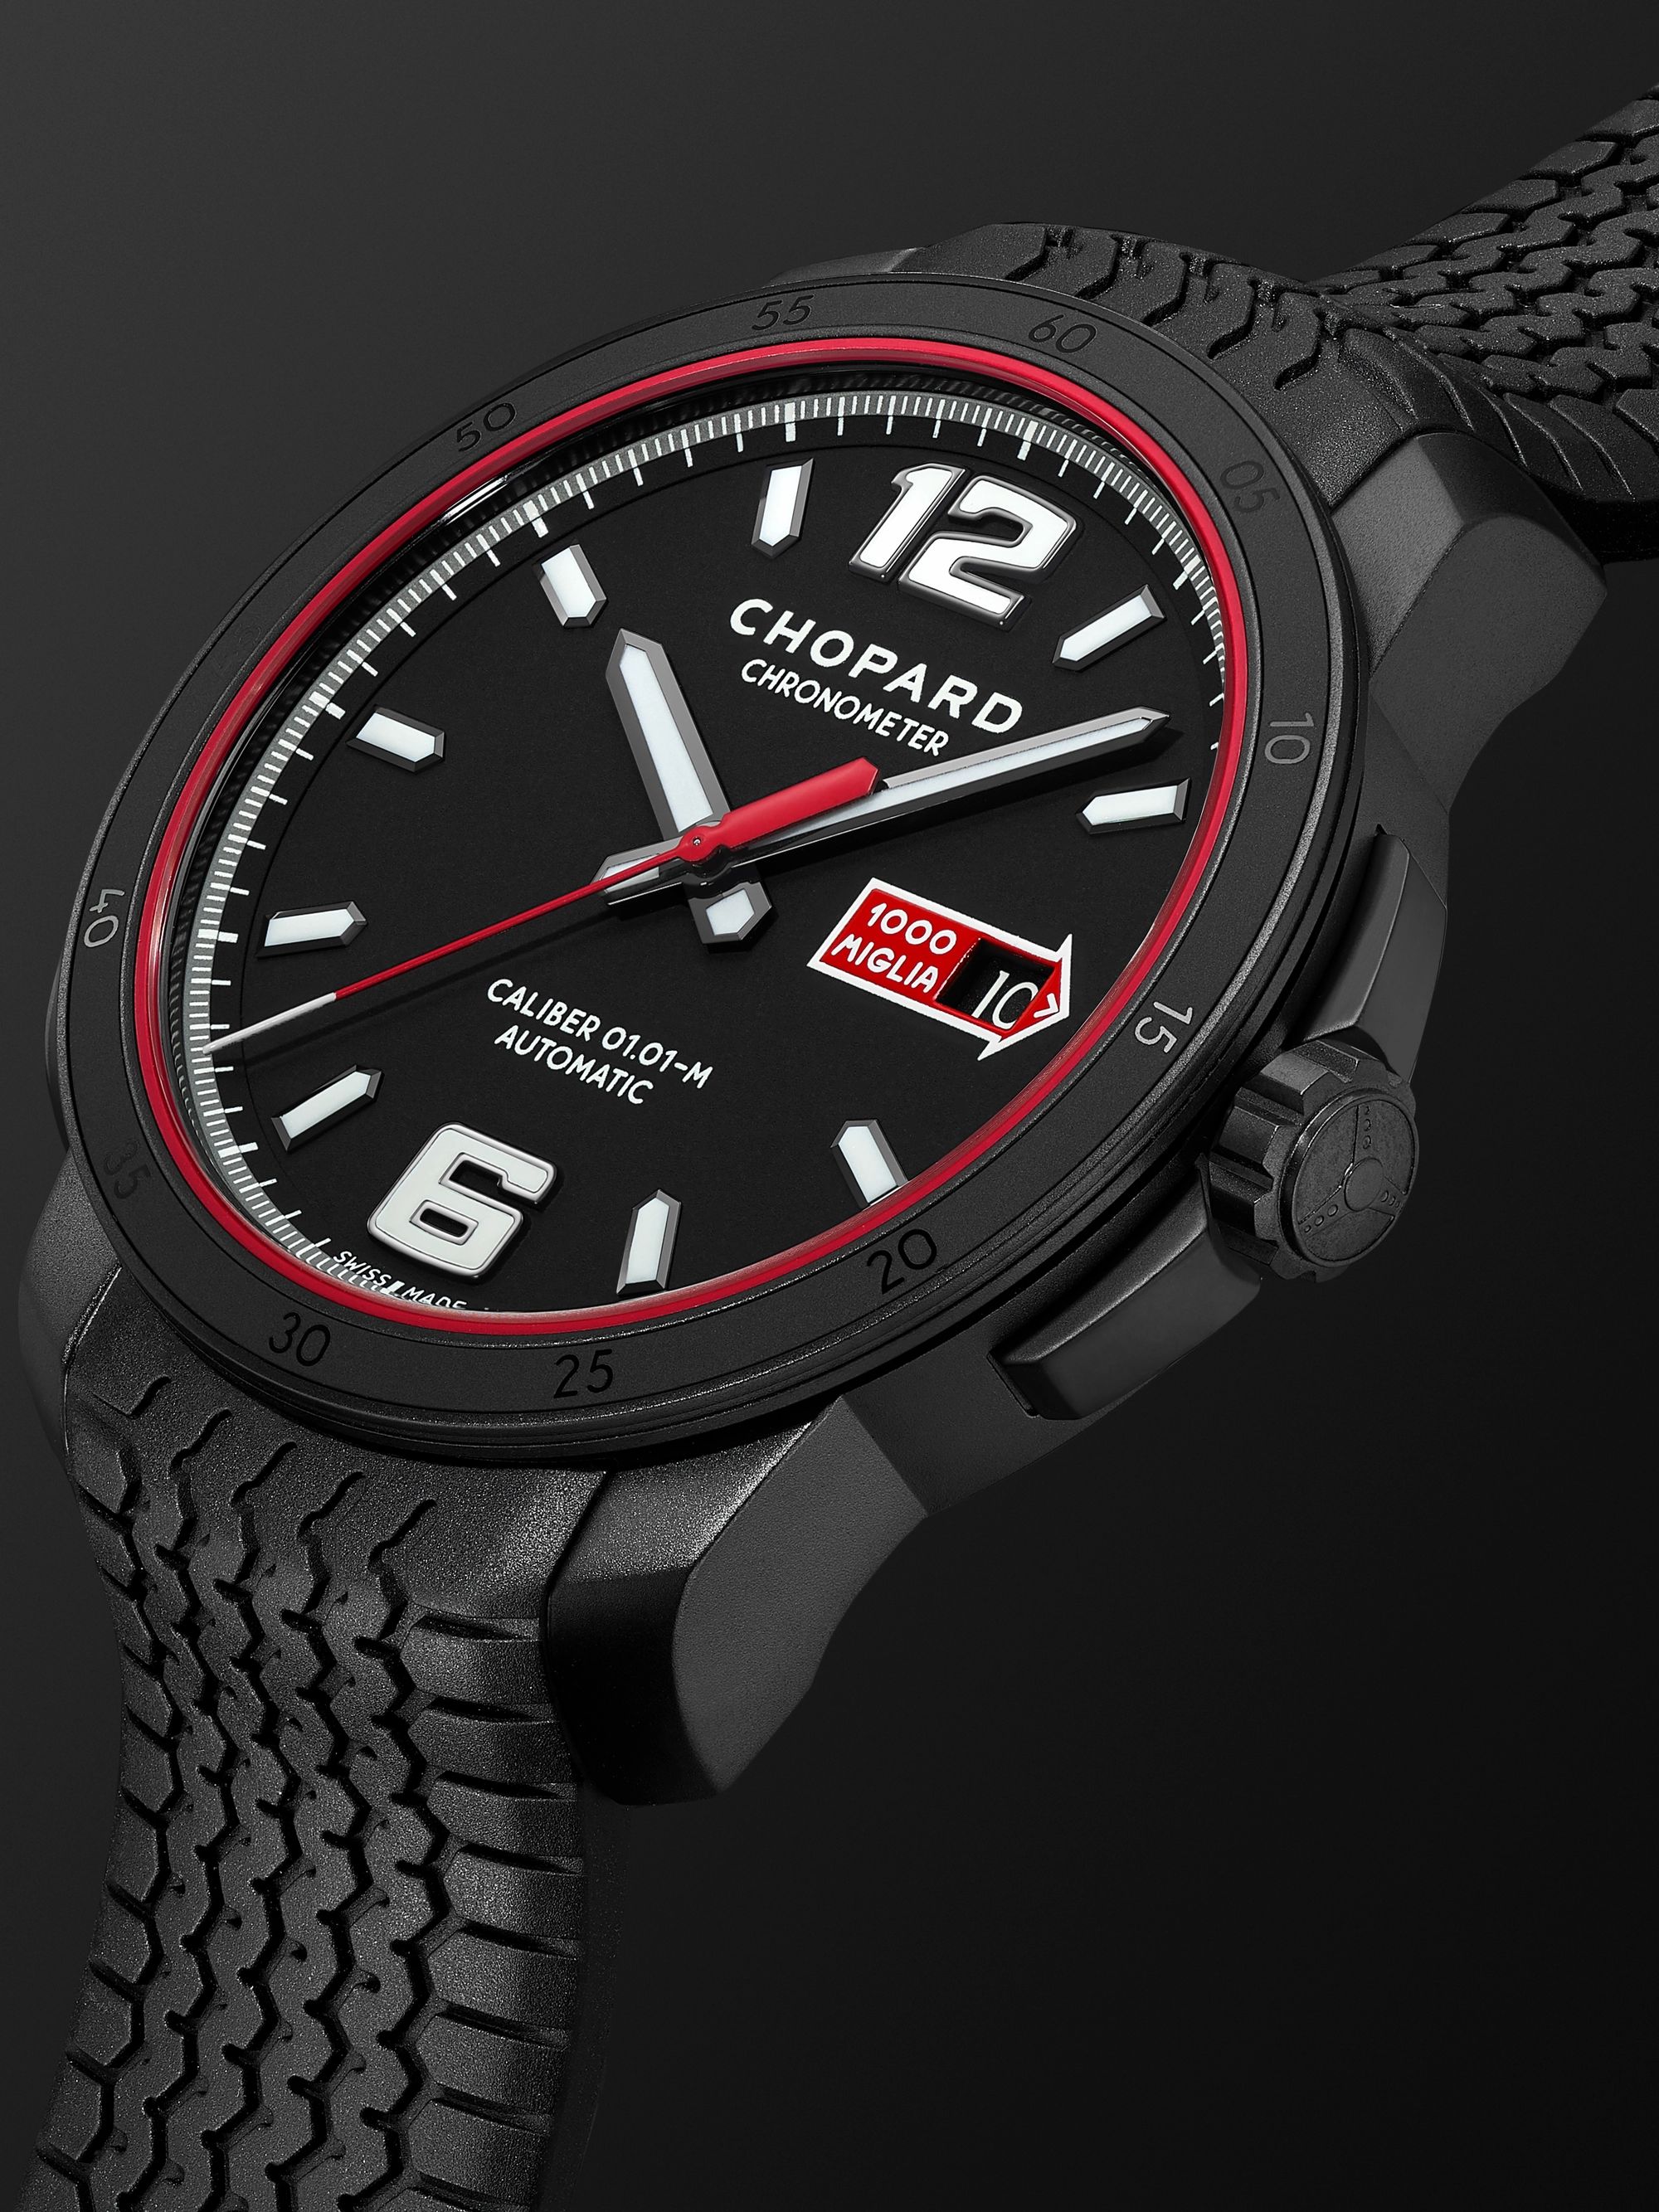 CHOPARD Mille Miglia GTS Speedblack Automatic Speed Limited Edition 43mm DLC-Coated Stainless Steel and Rubber Watch, Ref. No. 168565-3002